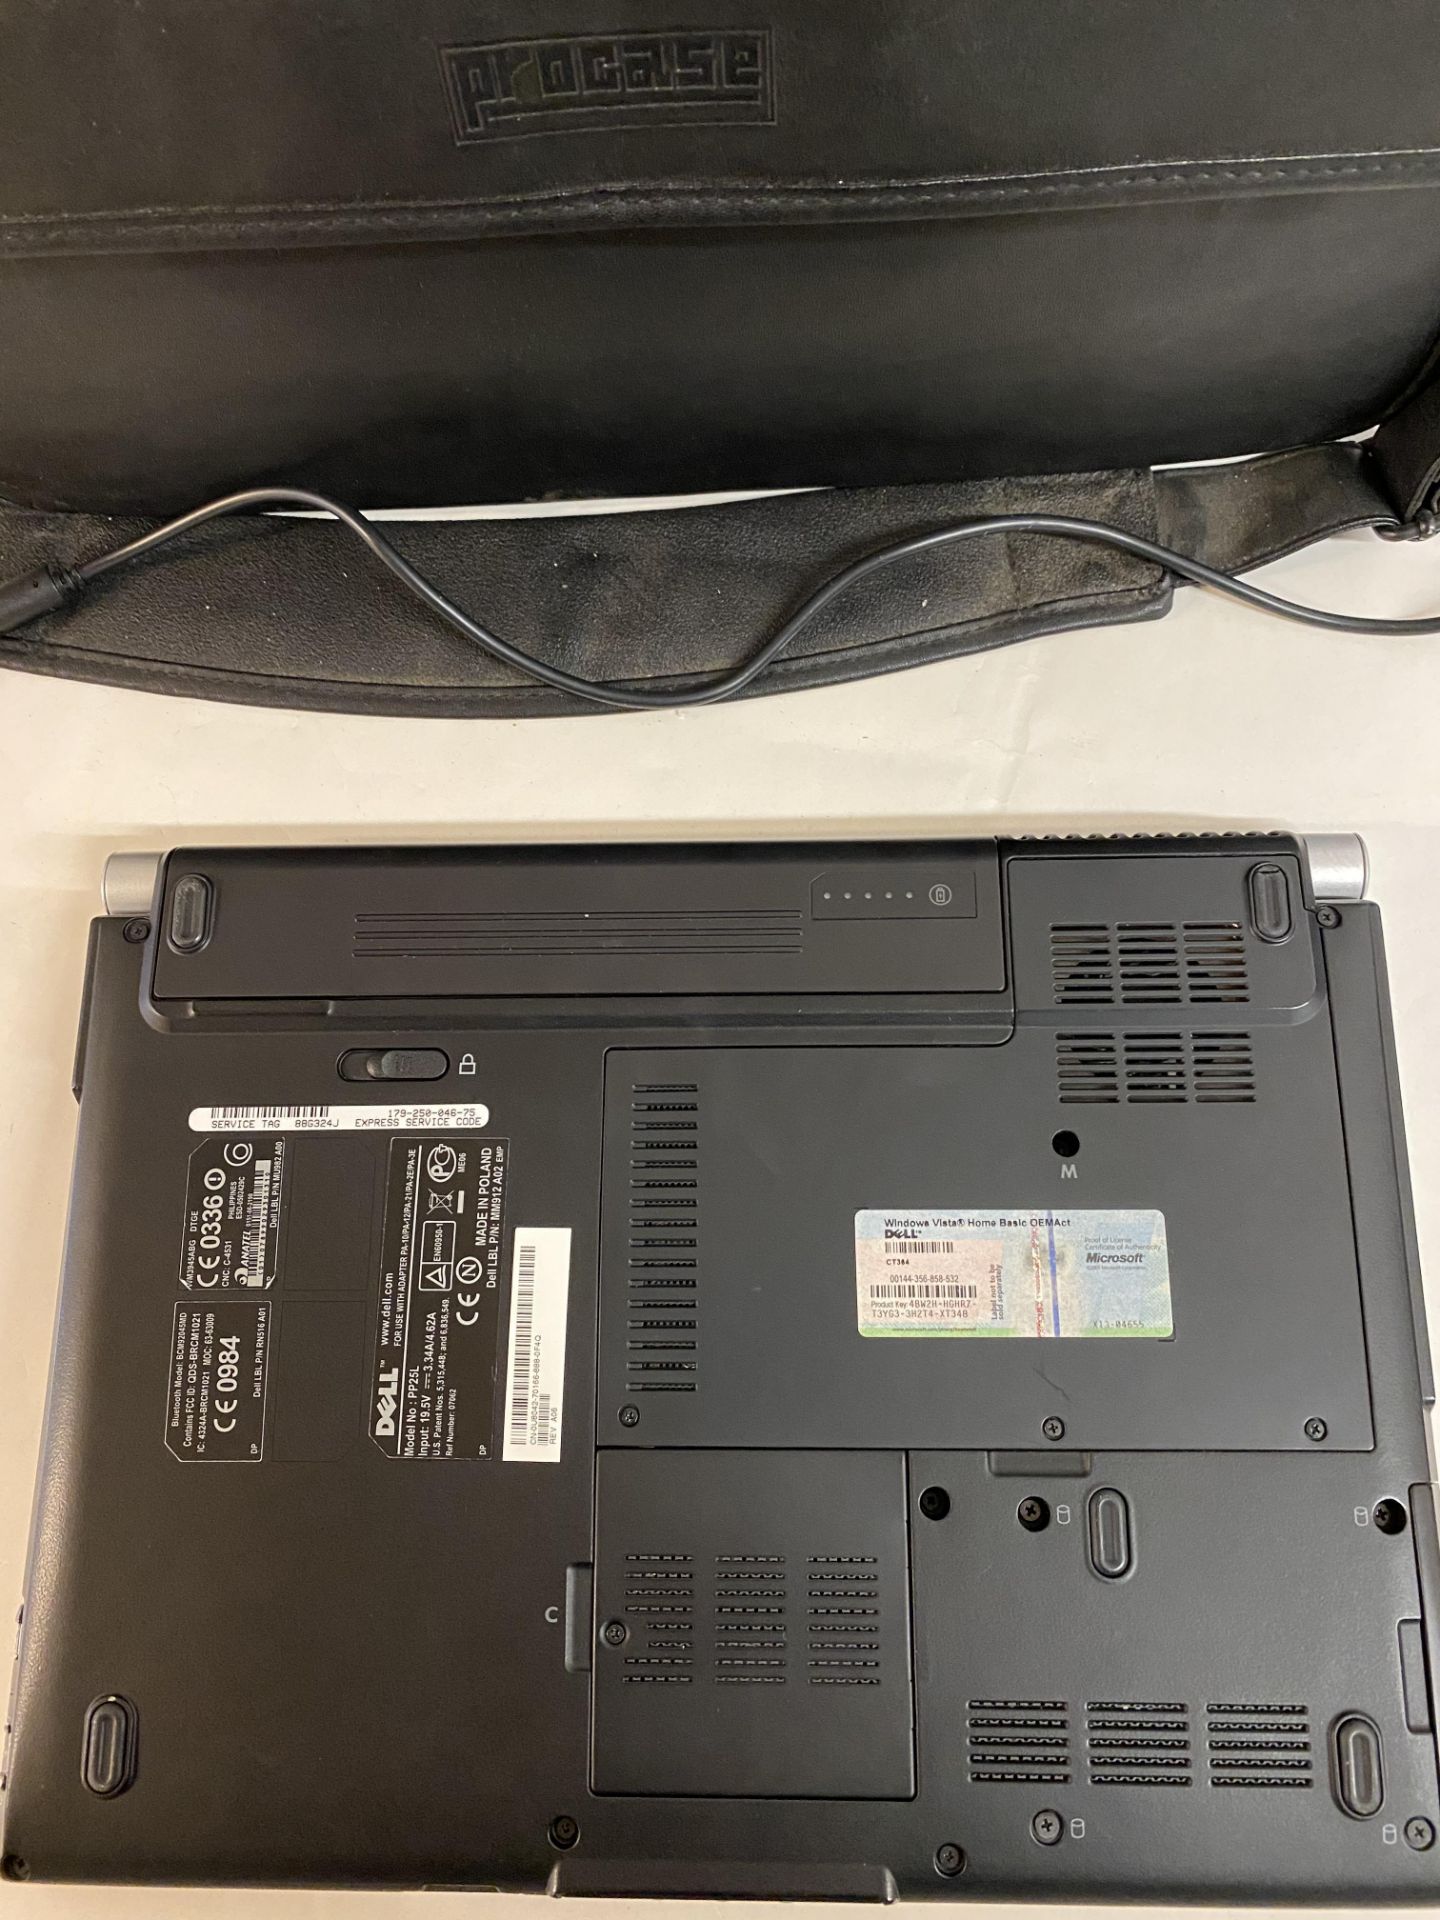 Dell XPS M1330 Laptop (may need new hard drive, see images) - Image 7 of 7